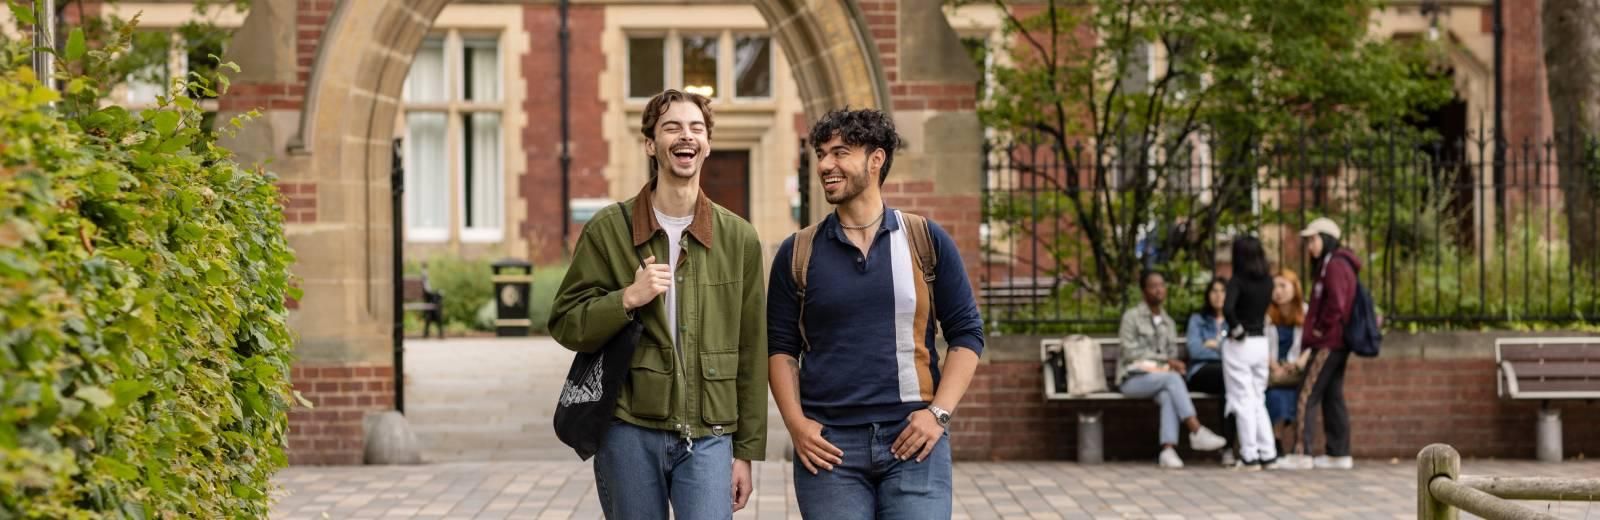 Two students walk through campus side by side, they are laughing. In the background another group of students sit at a bench, and the redbrick arch of Clothworker's Court can be seen.